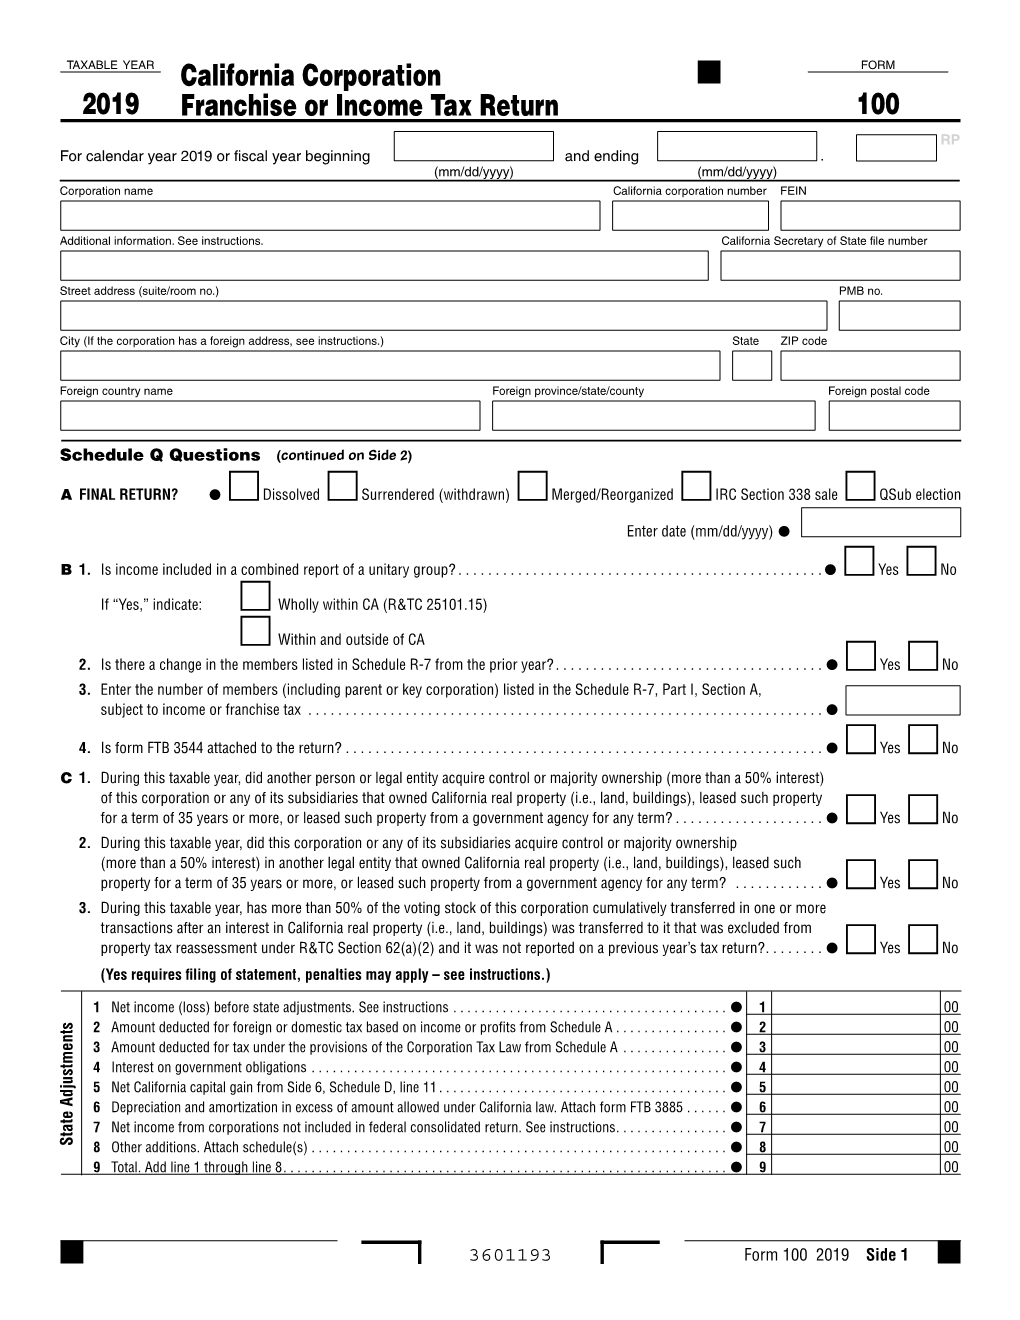 2019 Form 100 California Corporation Franchise Or Income Tax Return